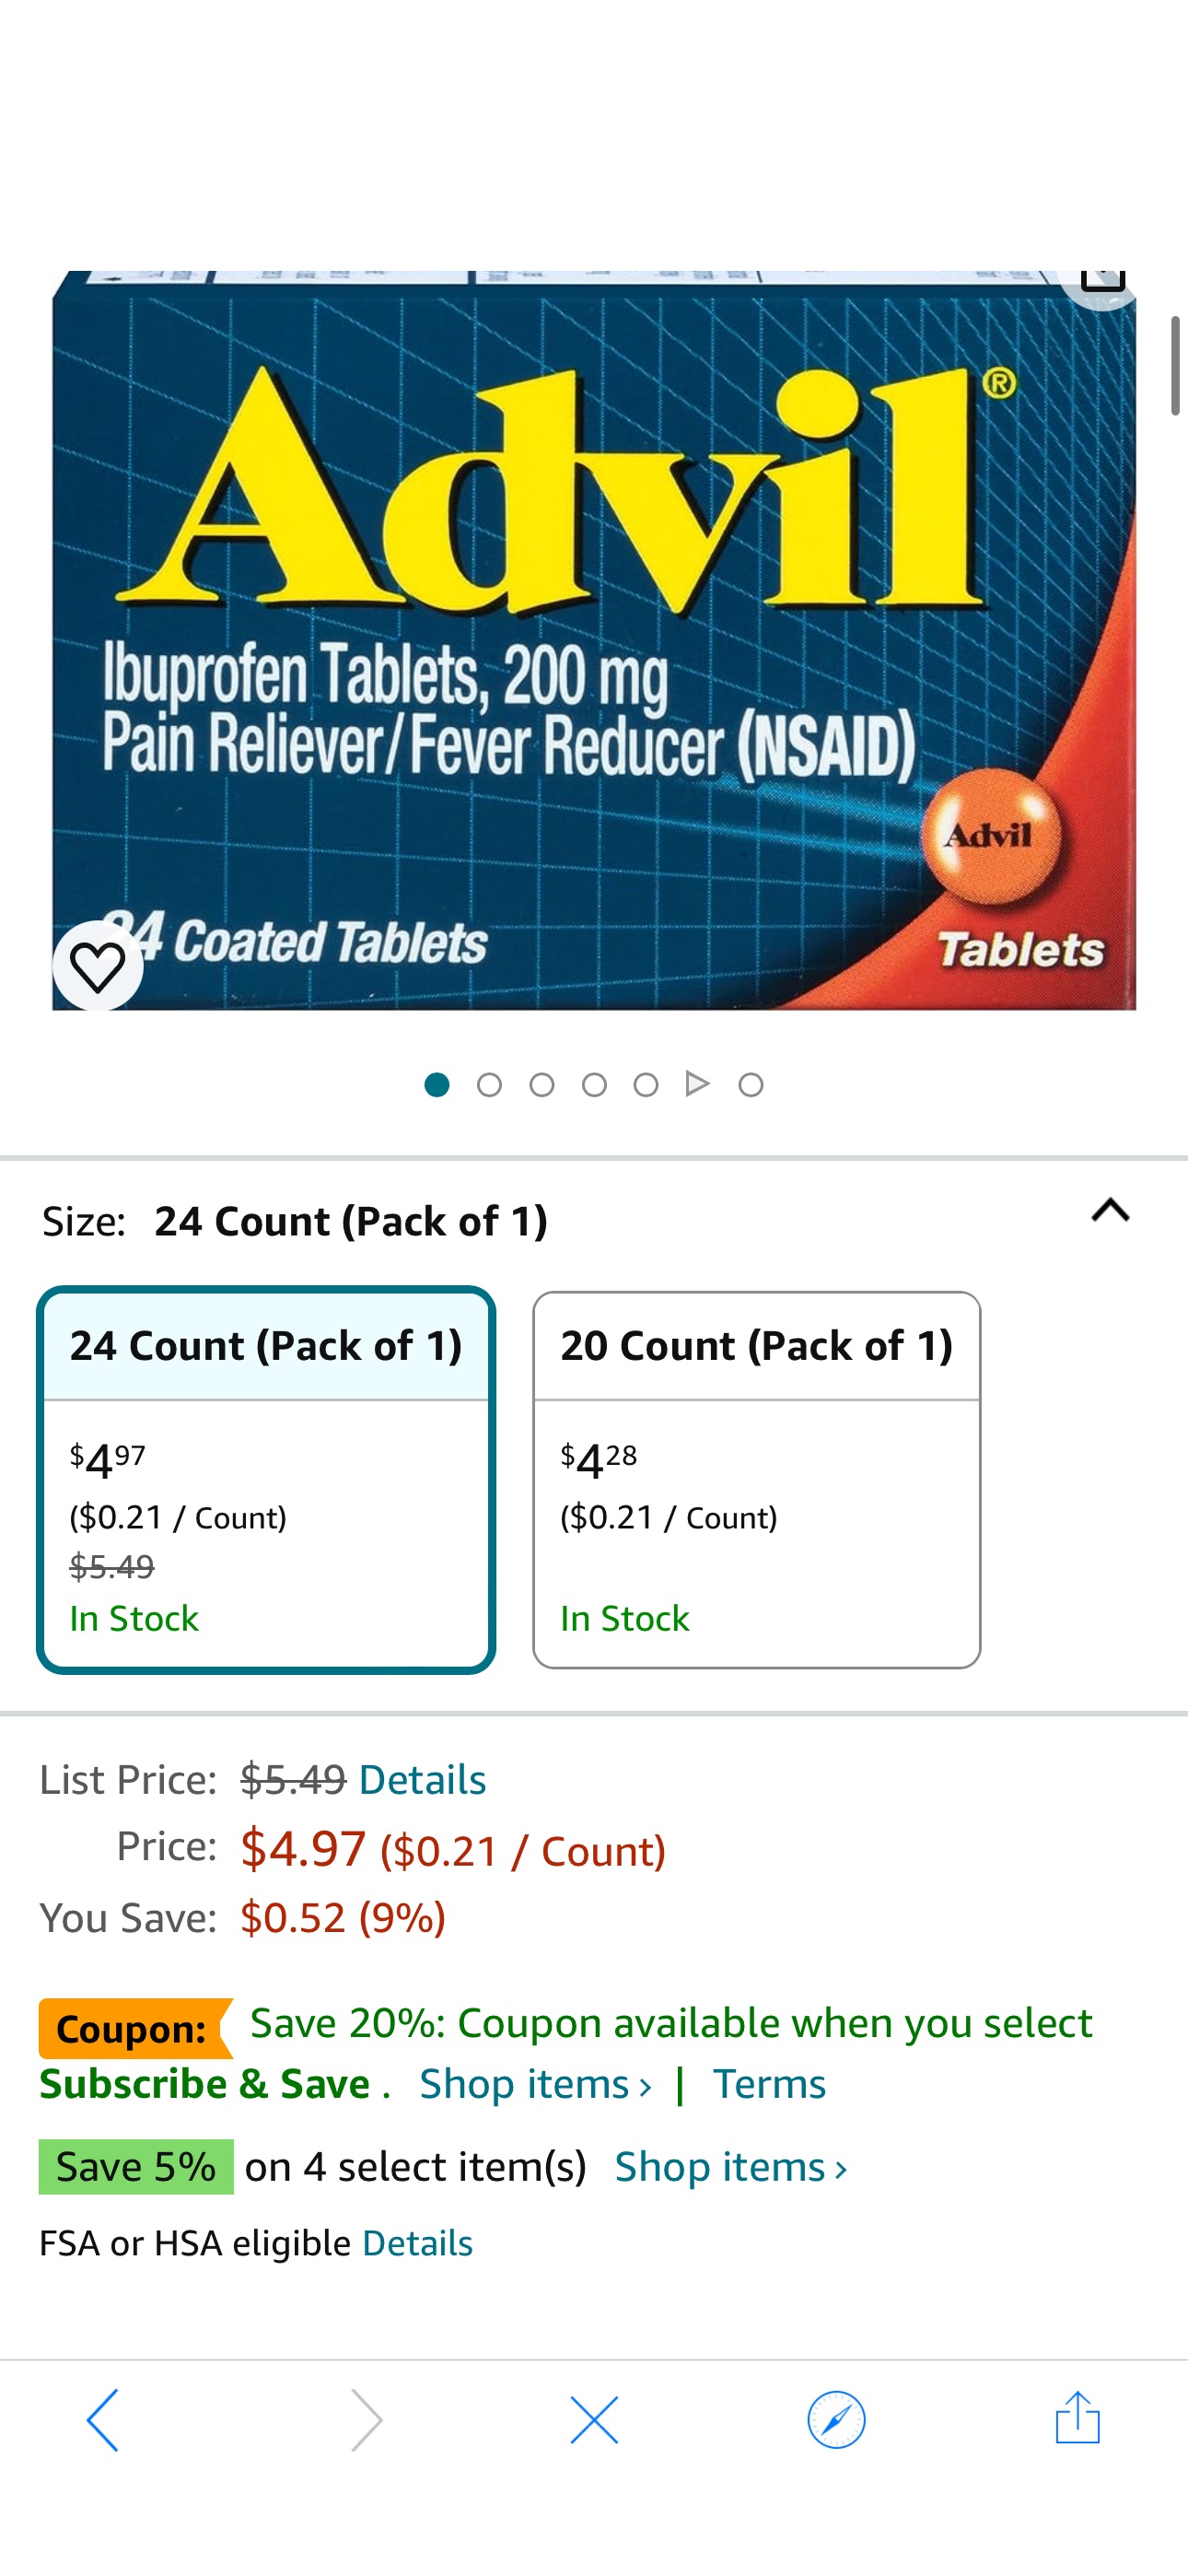 Amazon.com: Advil Pain Reliever and Fever Reducer, Ibuprofen 200mg for Pain Relief - 24 Coated Tablets : Health & Household省20%off